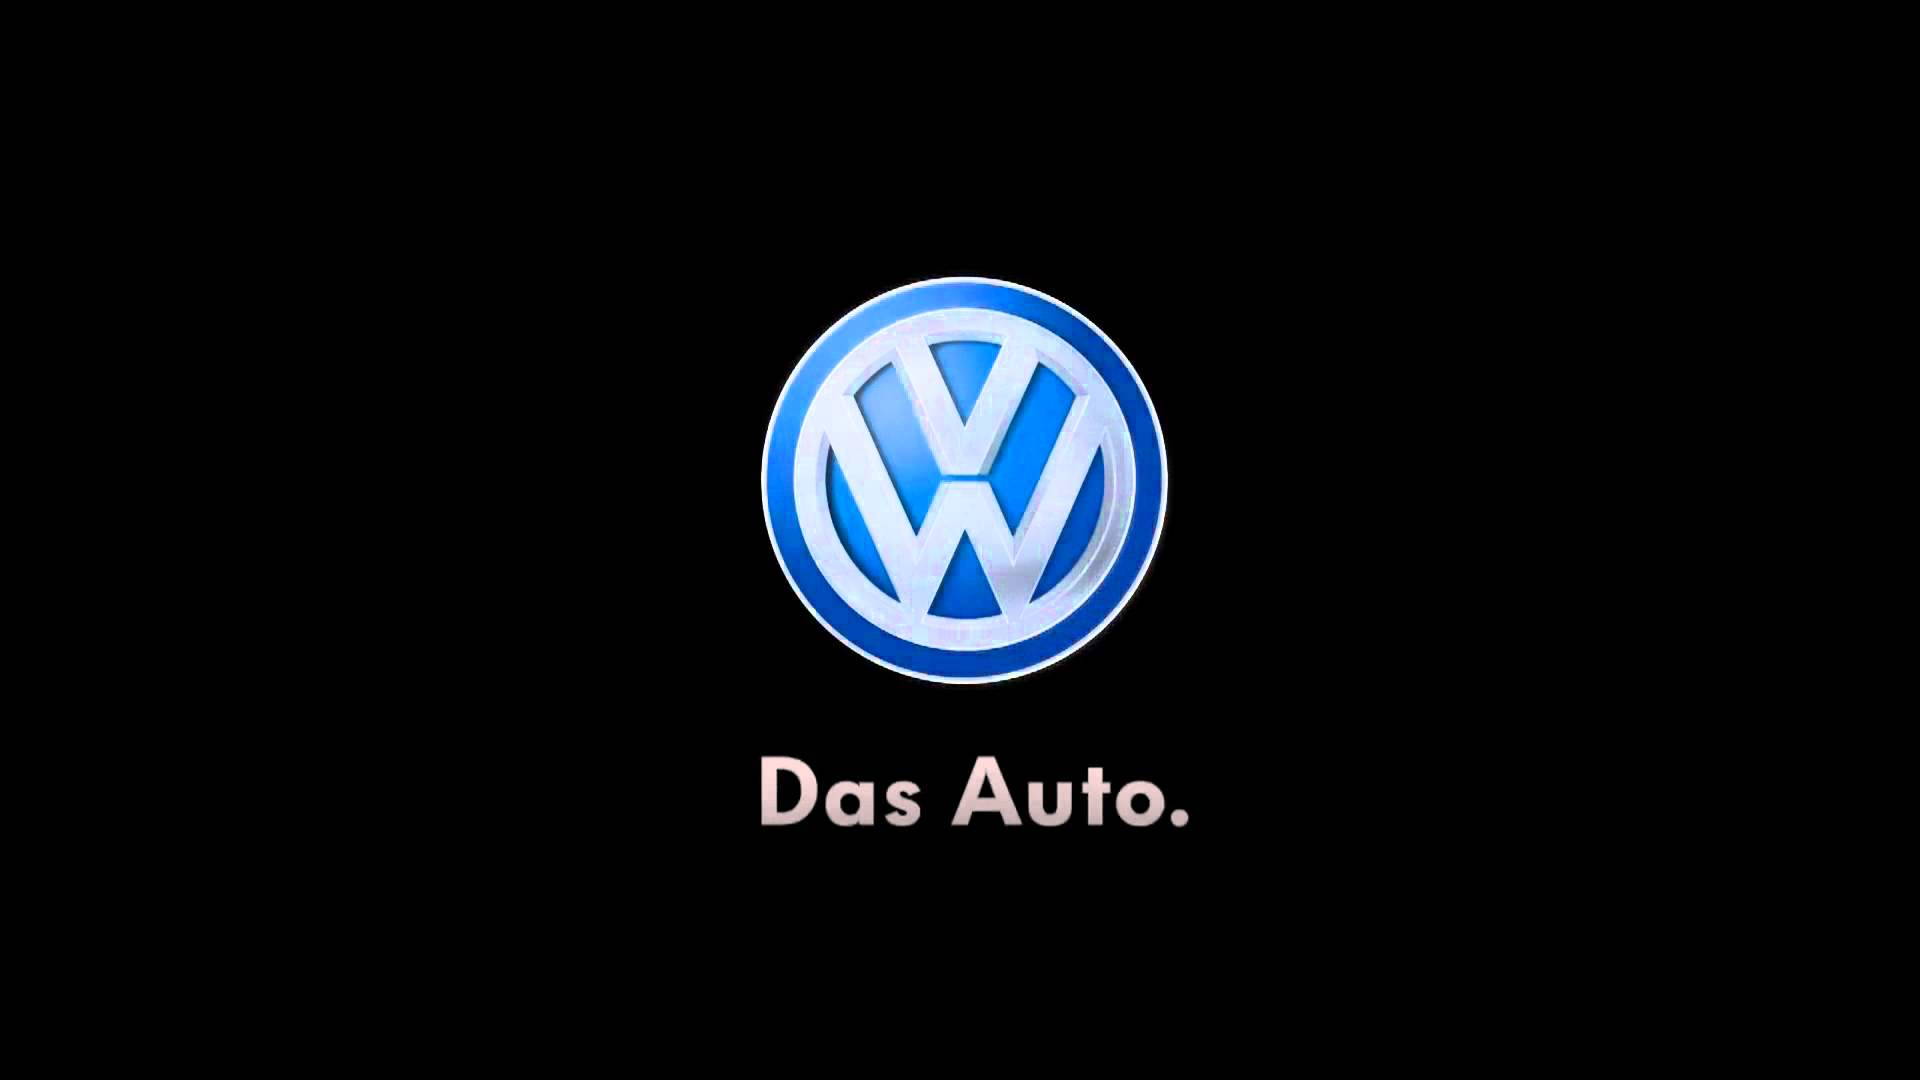 Displaying 19 Images For   Volkswagen Das Auto Logo Wallpaper 1920x1080